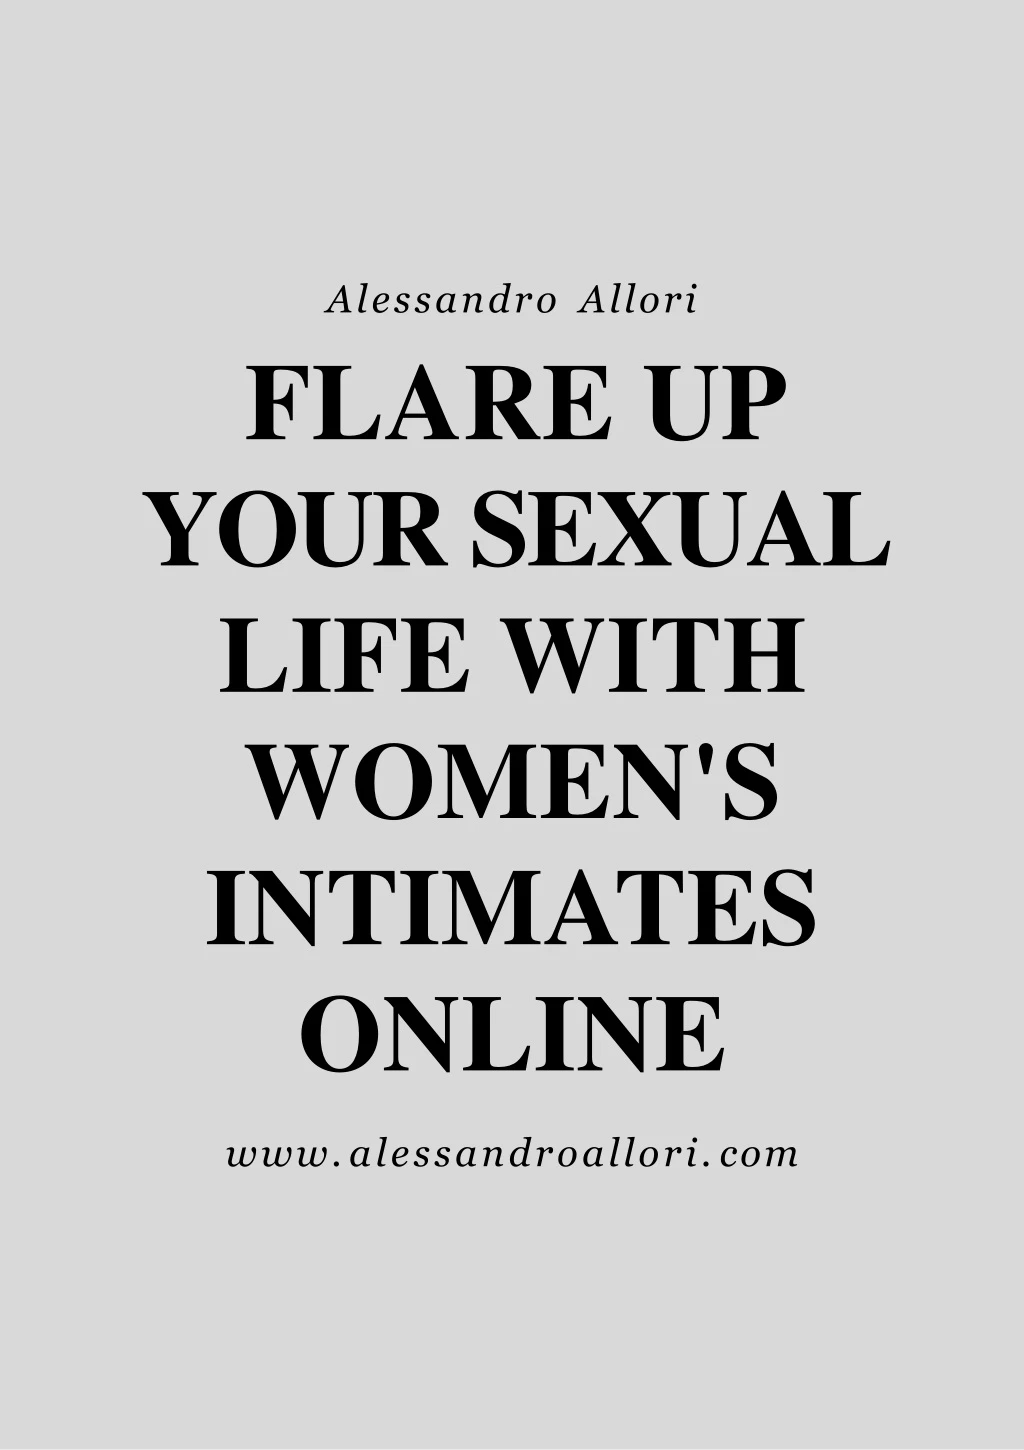 alessandro allori flare up your sexual life with